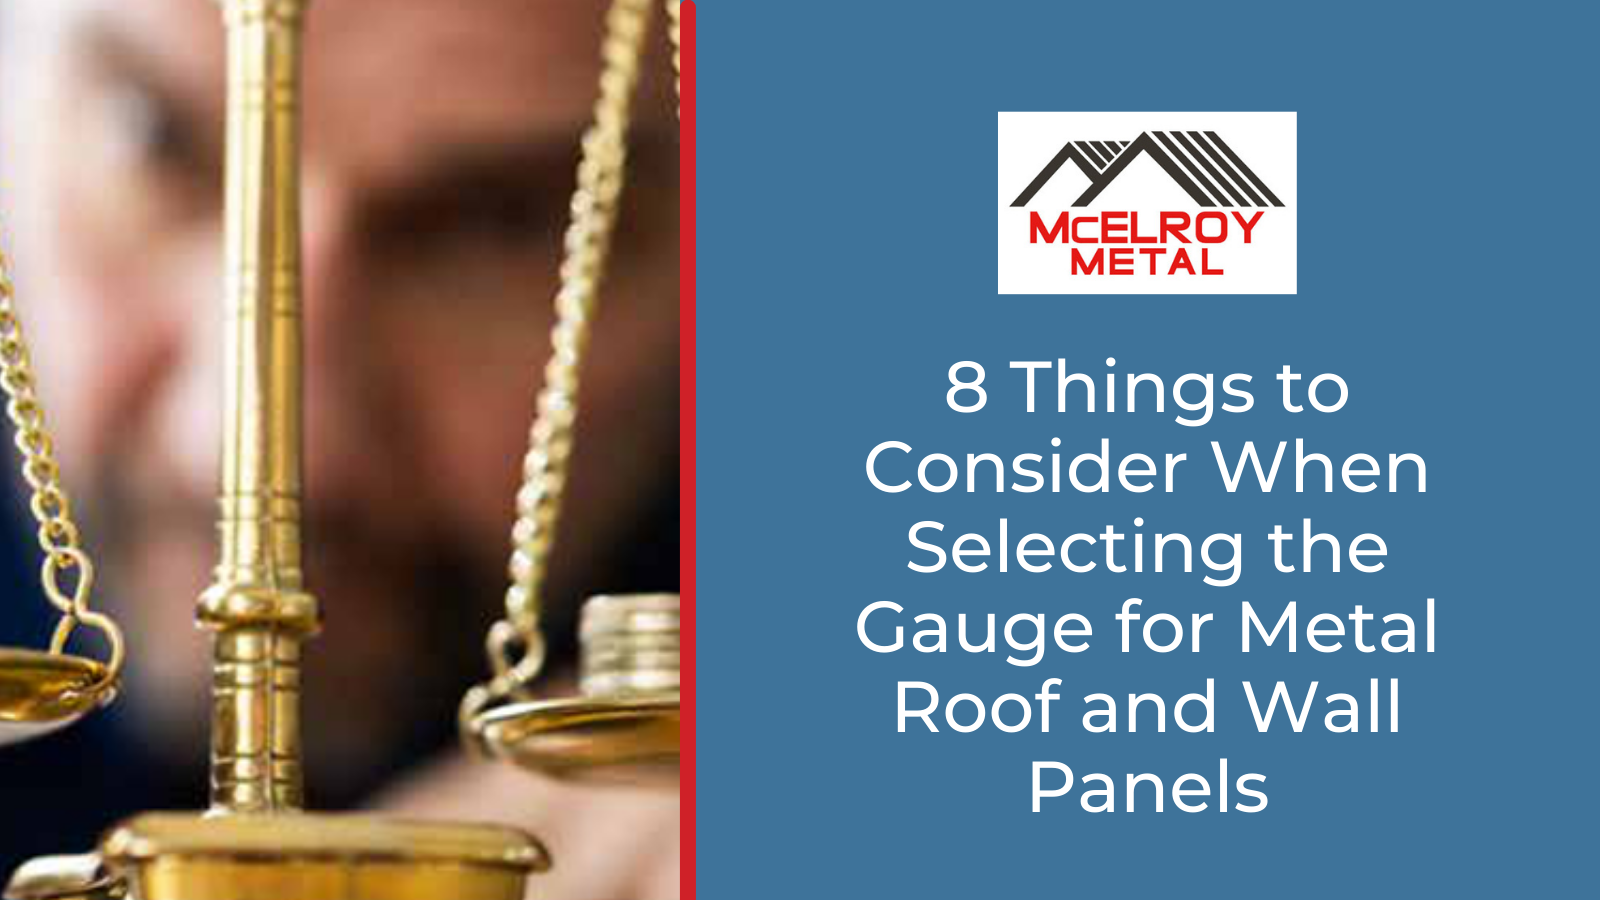 8 Things to Consider When Selecting the Gauge for Metal Roof and Wall Panels